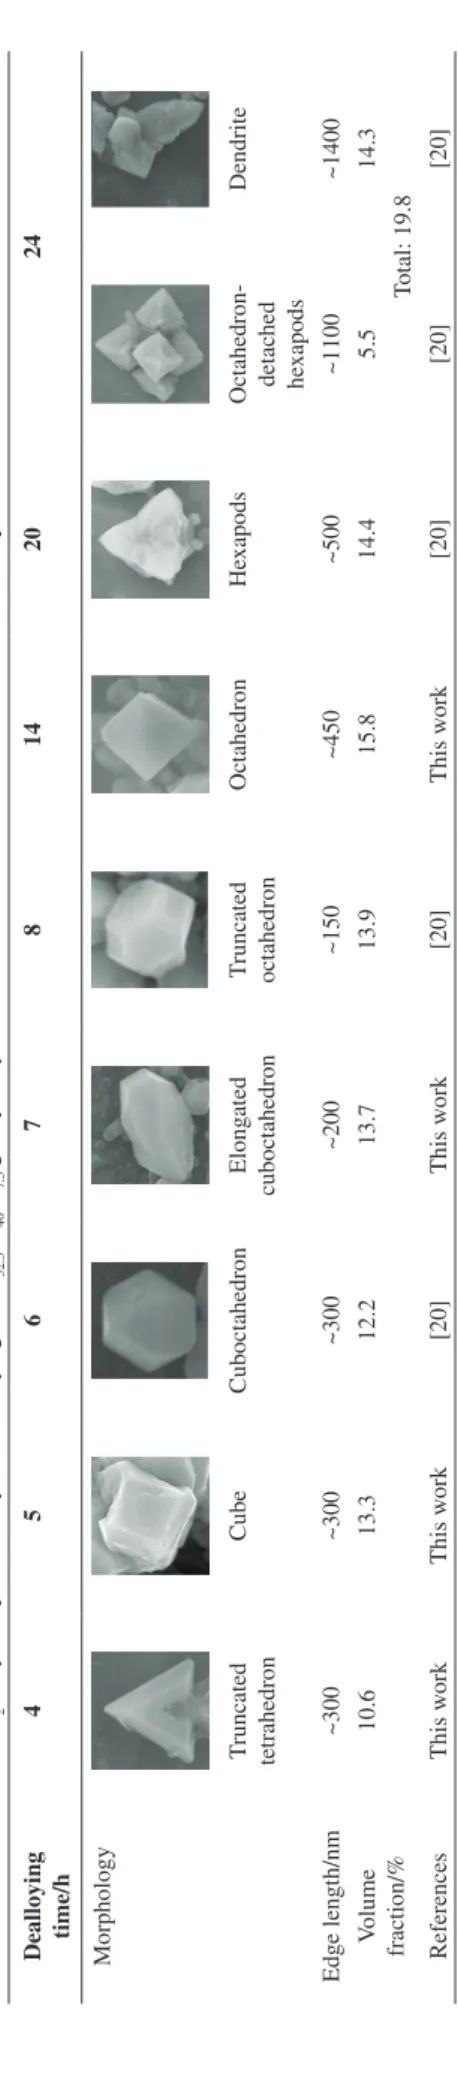 Figure 1 shows SEM images of the Cu 52.5 Hf 40 Al 7.5 metallic glasses dealloyed in 0.05 M diluted HCl solution at  298 K for different time